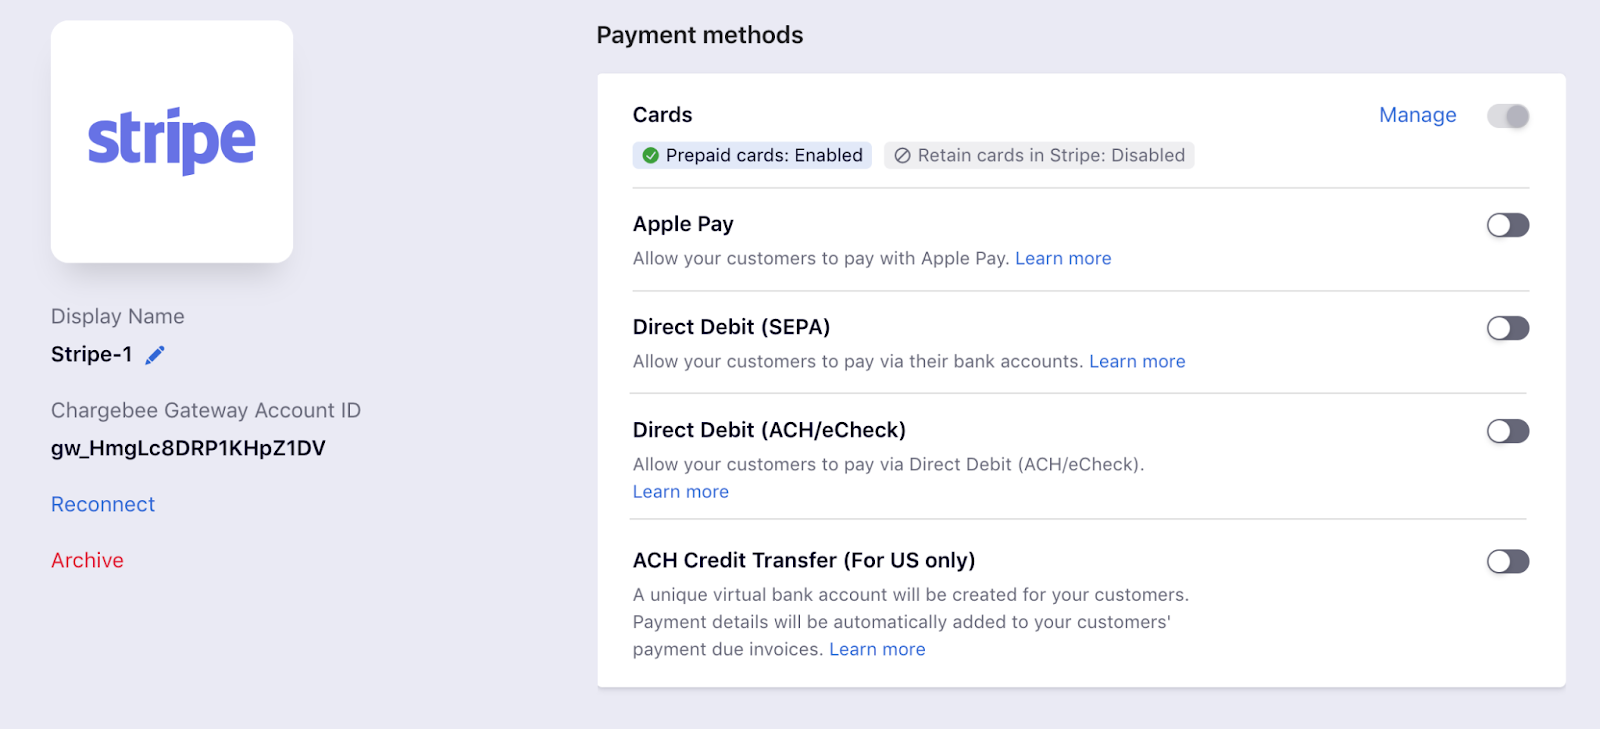 Configuring Stripe payments in Chargebee